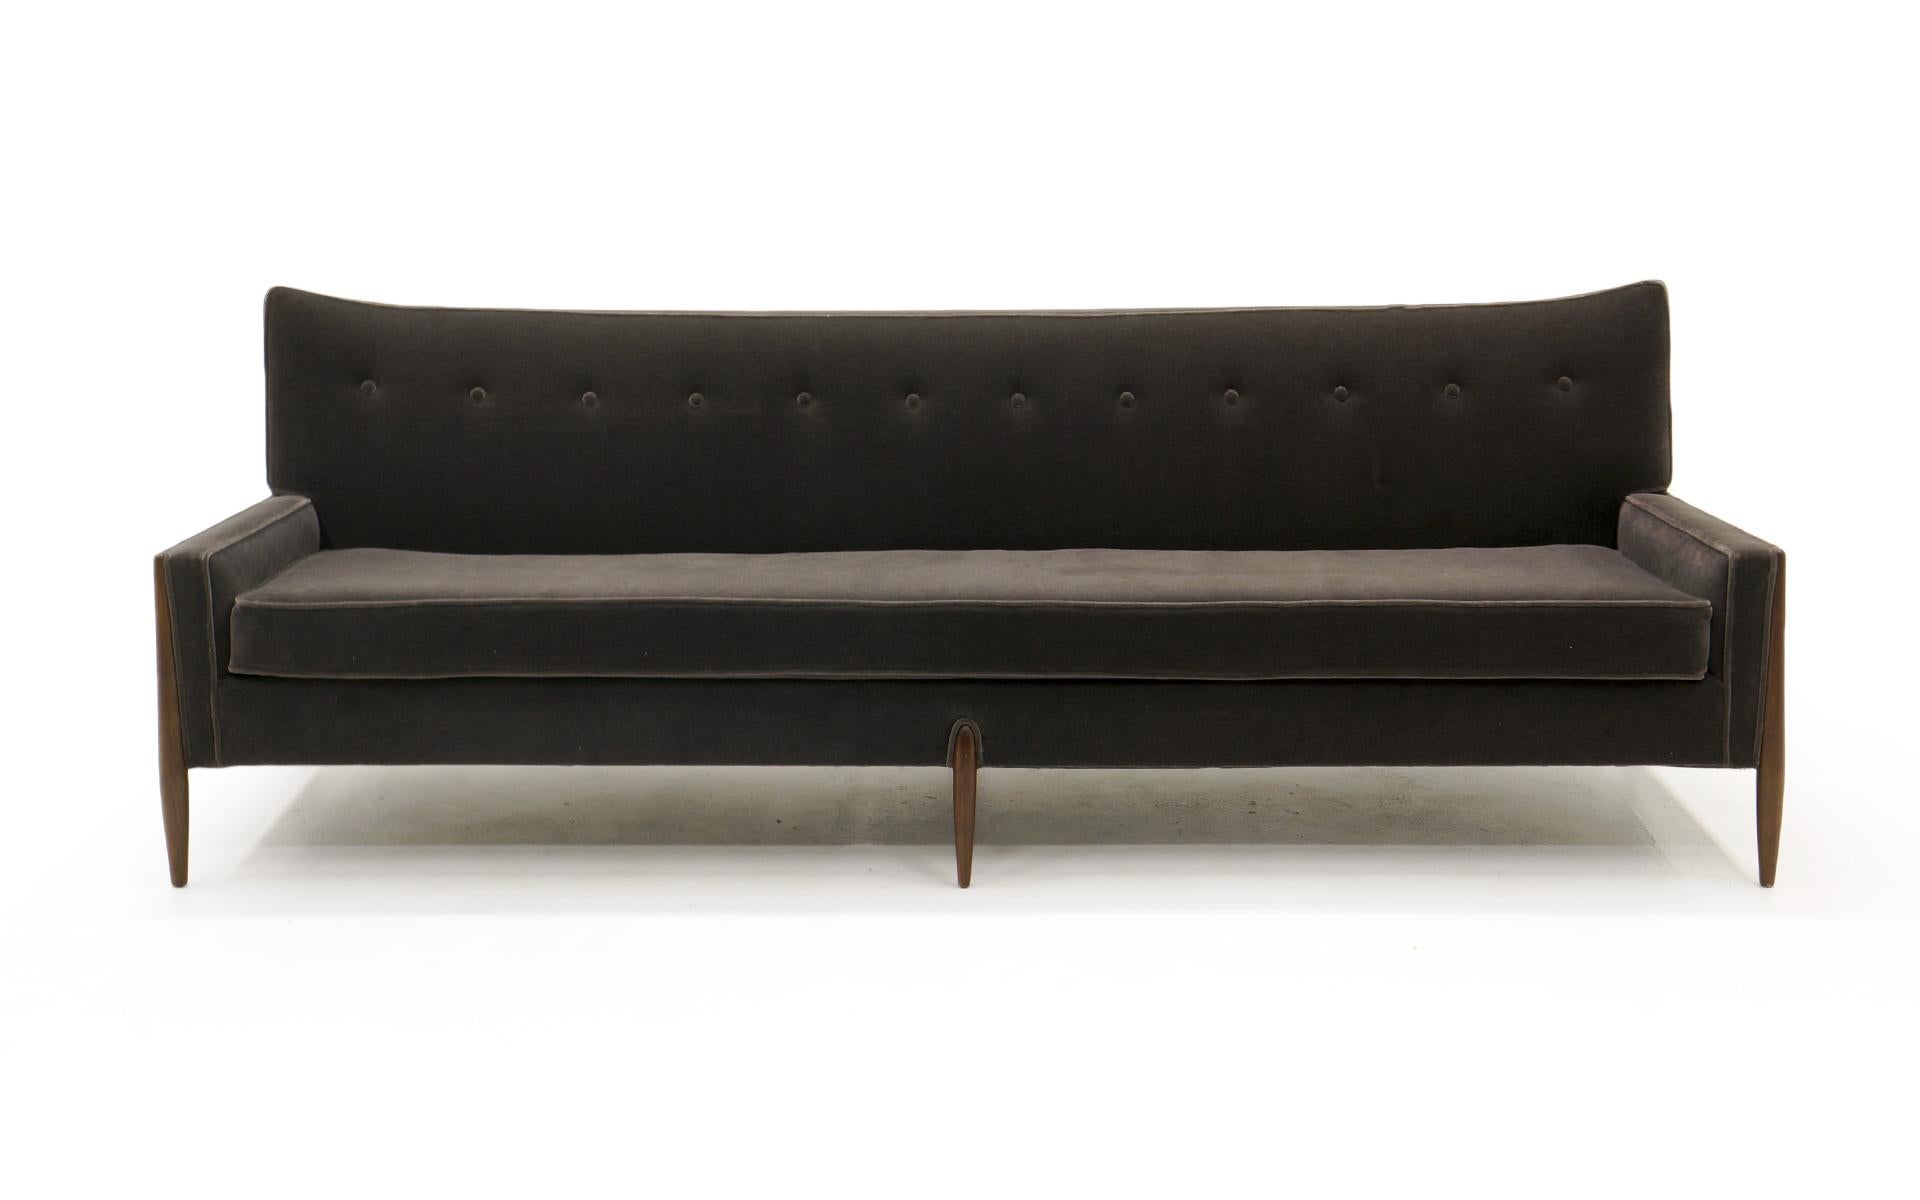 Sculptural sofa by Jules Heumann for Metropolitan. Expertly restored and reupholstered in a beautiful charcoal grey mohair fabric. The legs are reminiscent of designs by Vladimir Kagan. This striking design is also very comfortable.